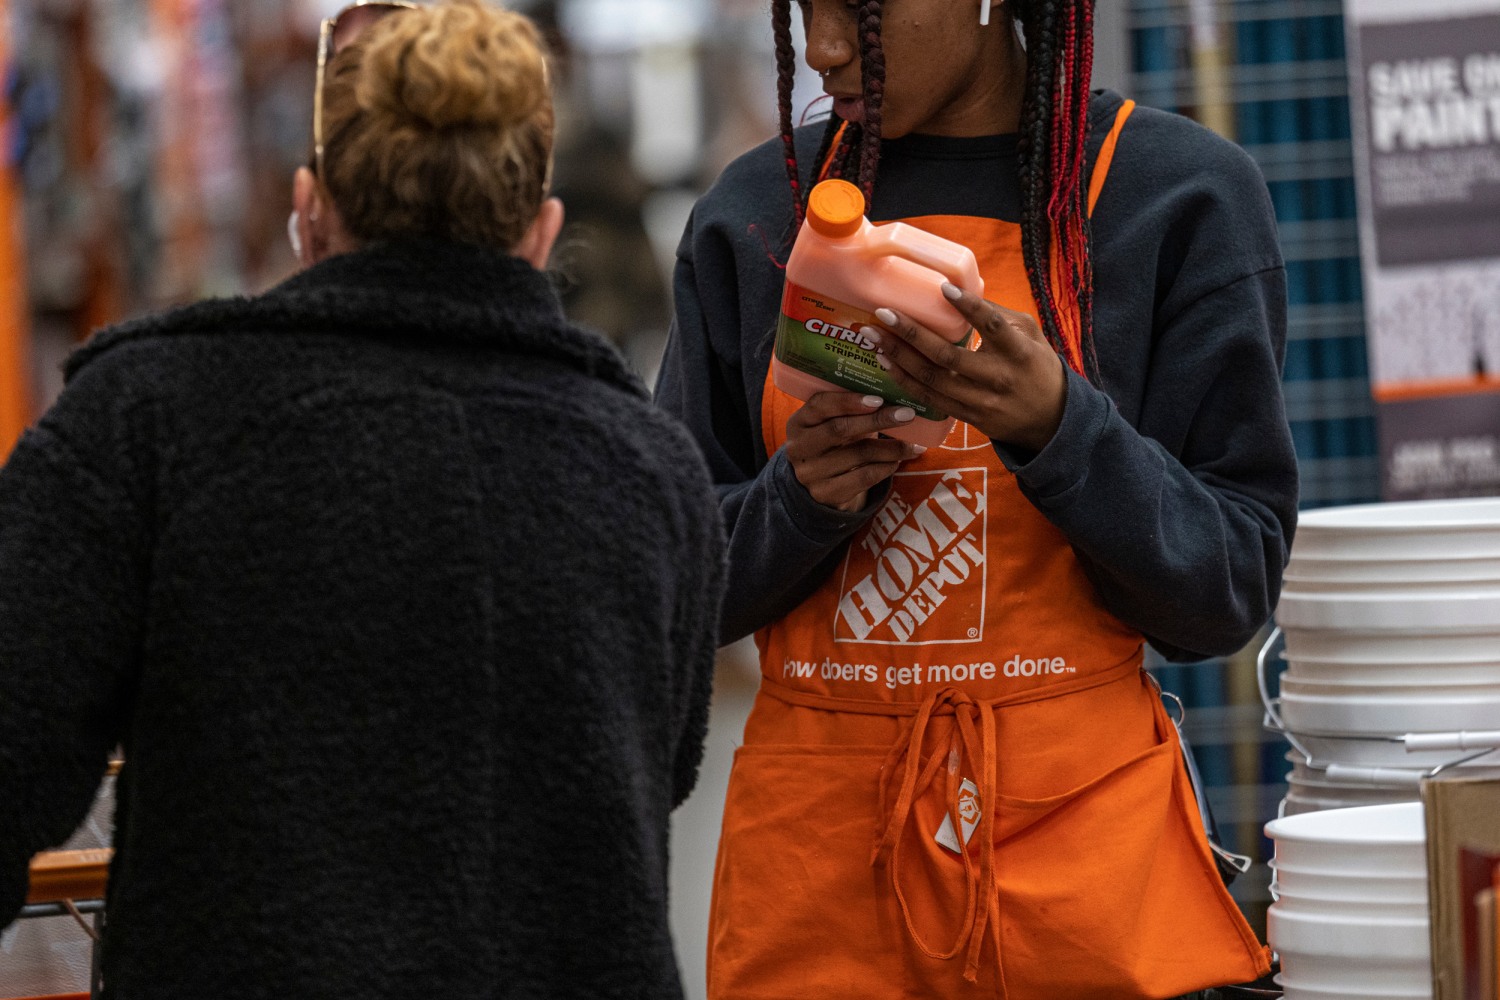 Home Depot to pay $72.5 million to settle California wage class